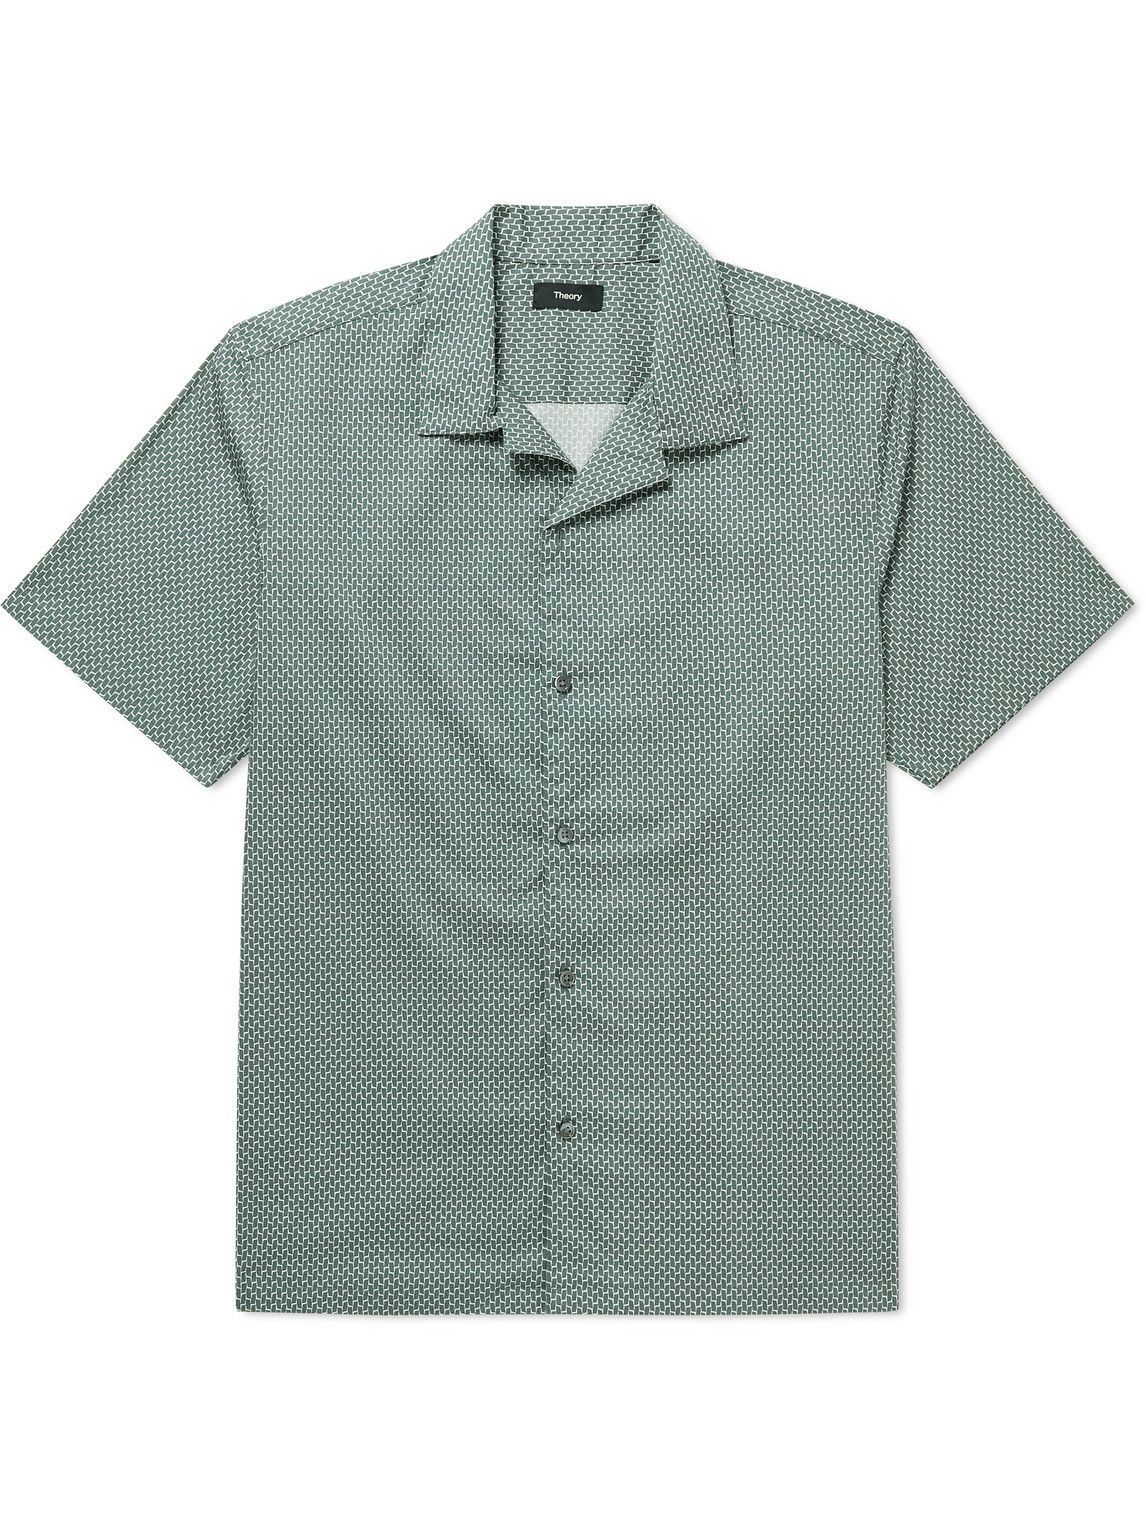 Theory - Irving Camp-Collar Printed Cotton-Blend Shirt - Green Theory